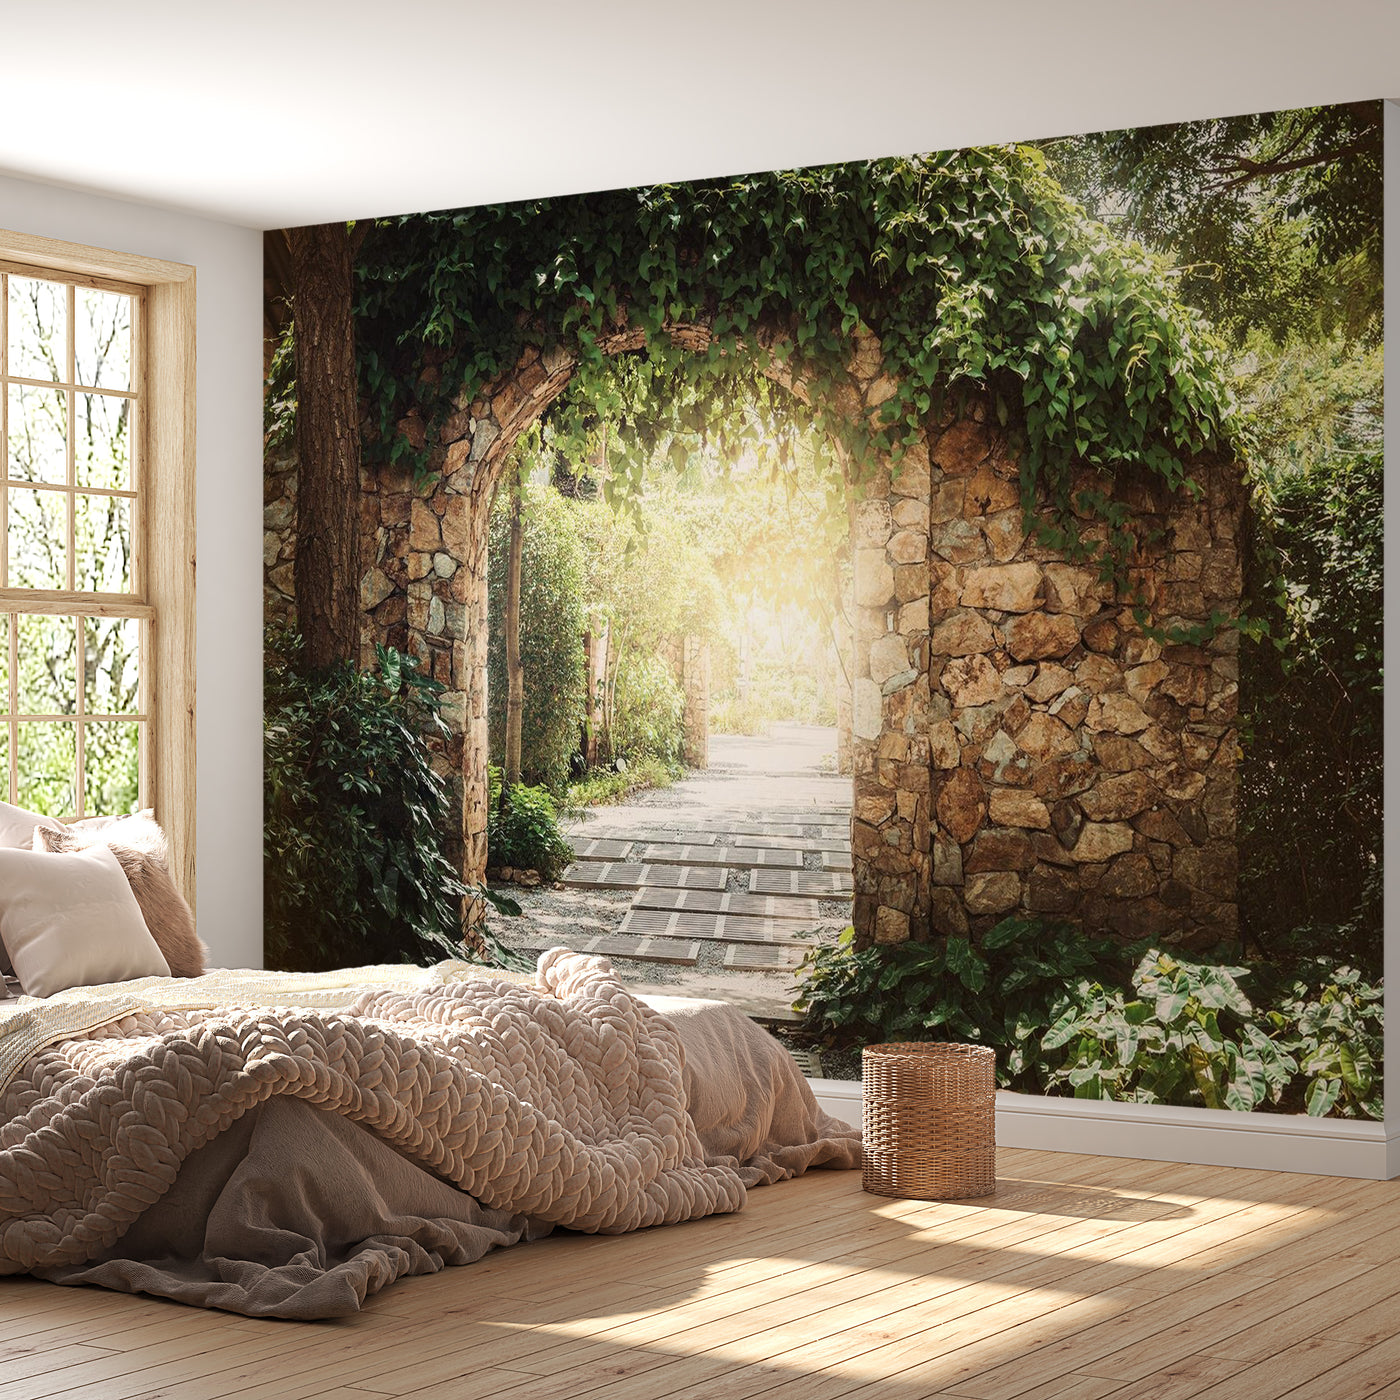 Peel & Stick Nature Wall Mural - Sunny Alley - Removable Wall Decals